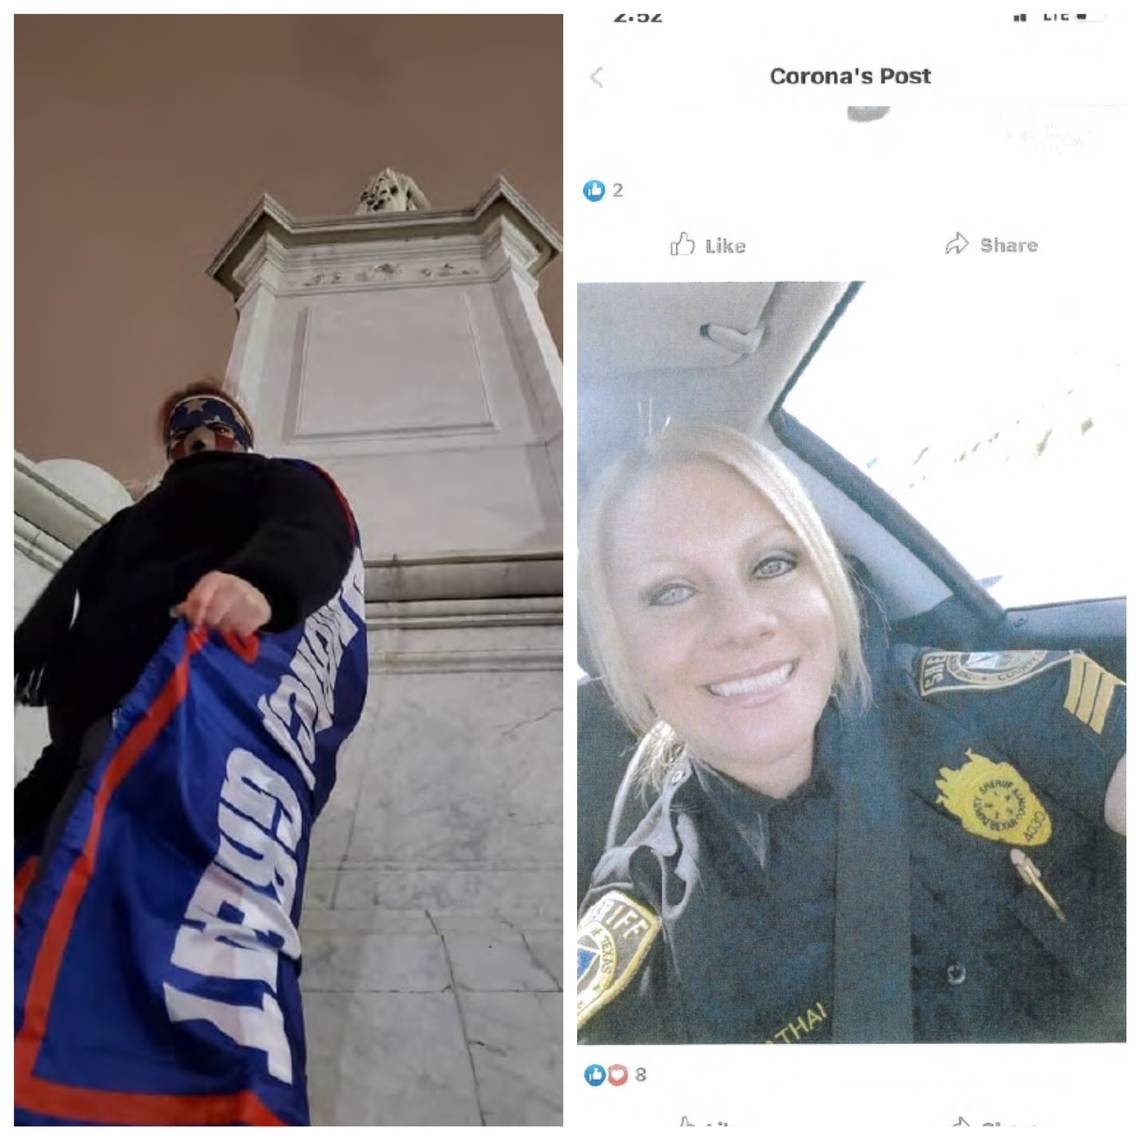 Deputy’s selfies at Jan. 6 insurrection got her fired, suit says. Now she gets payout